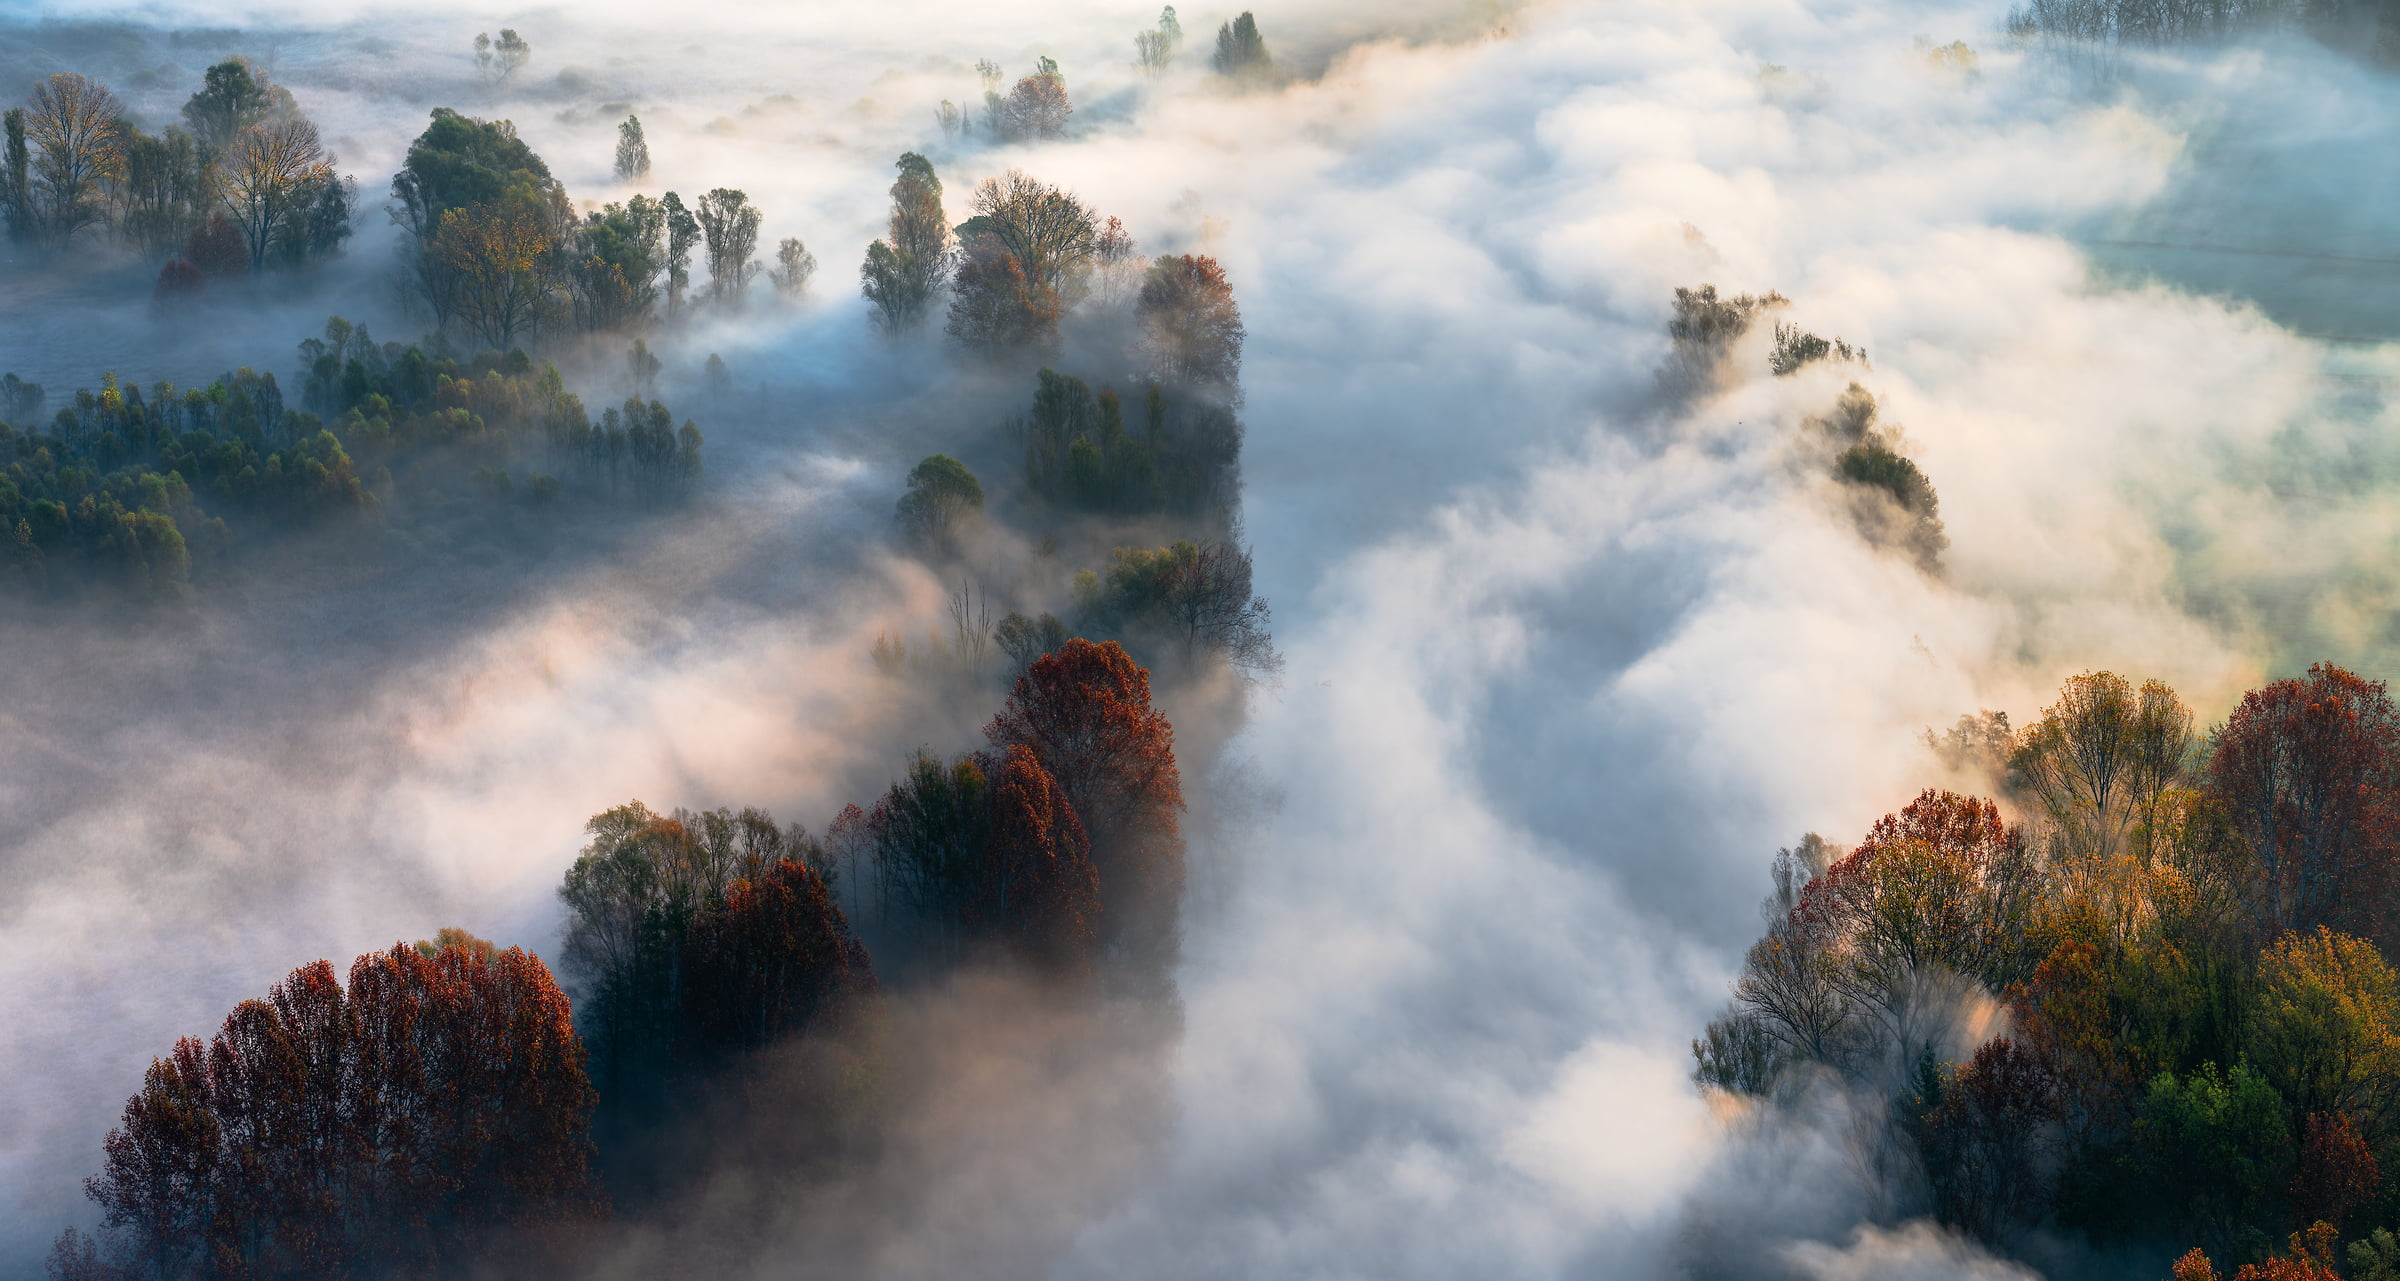 169 megapixels! A very high resolution, large-format VAST photo print of a misty landscape; photograph created by Ennio Pozzetti in Airuno, Lombardia, Italy.